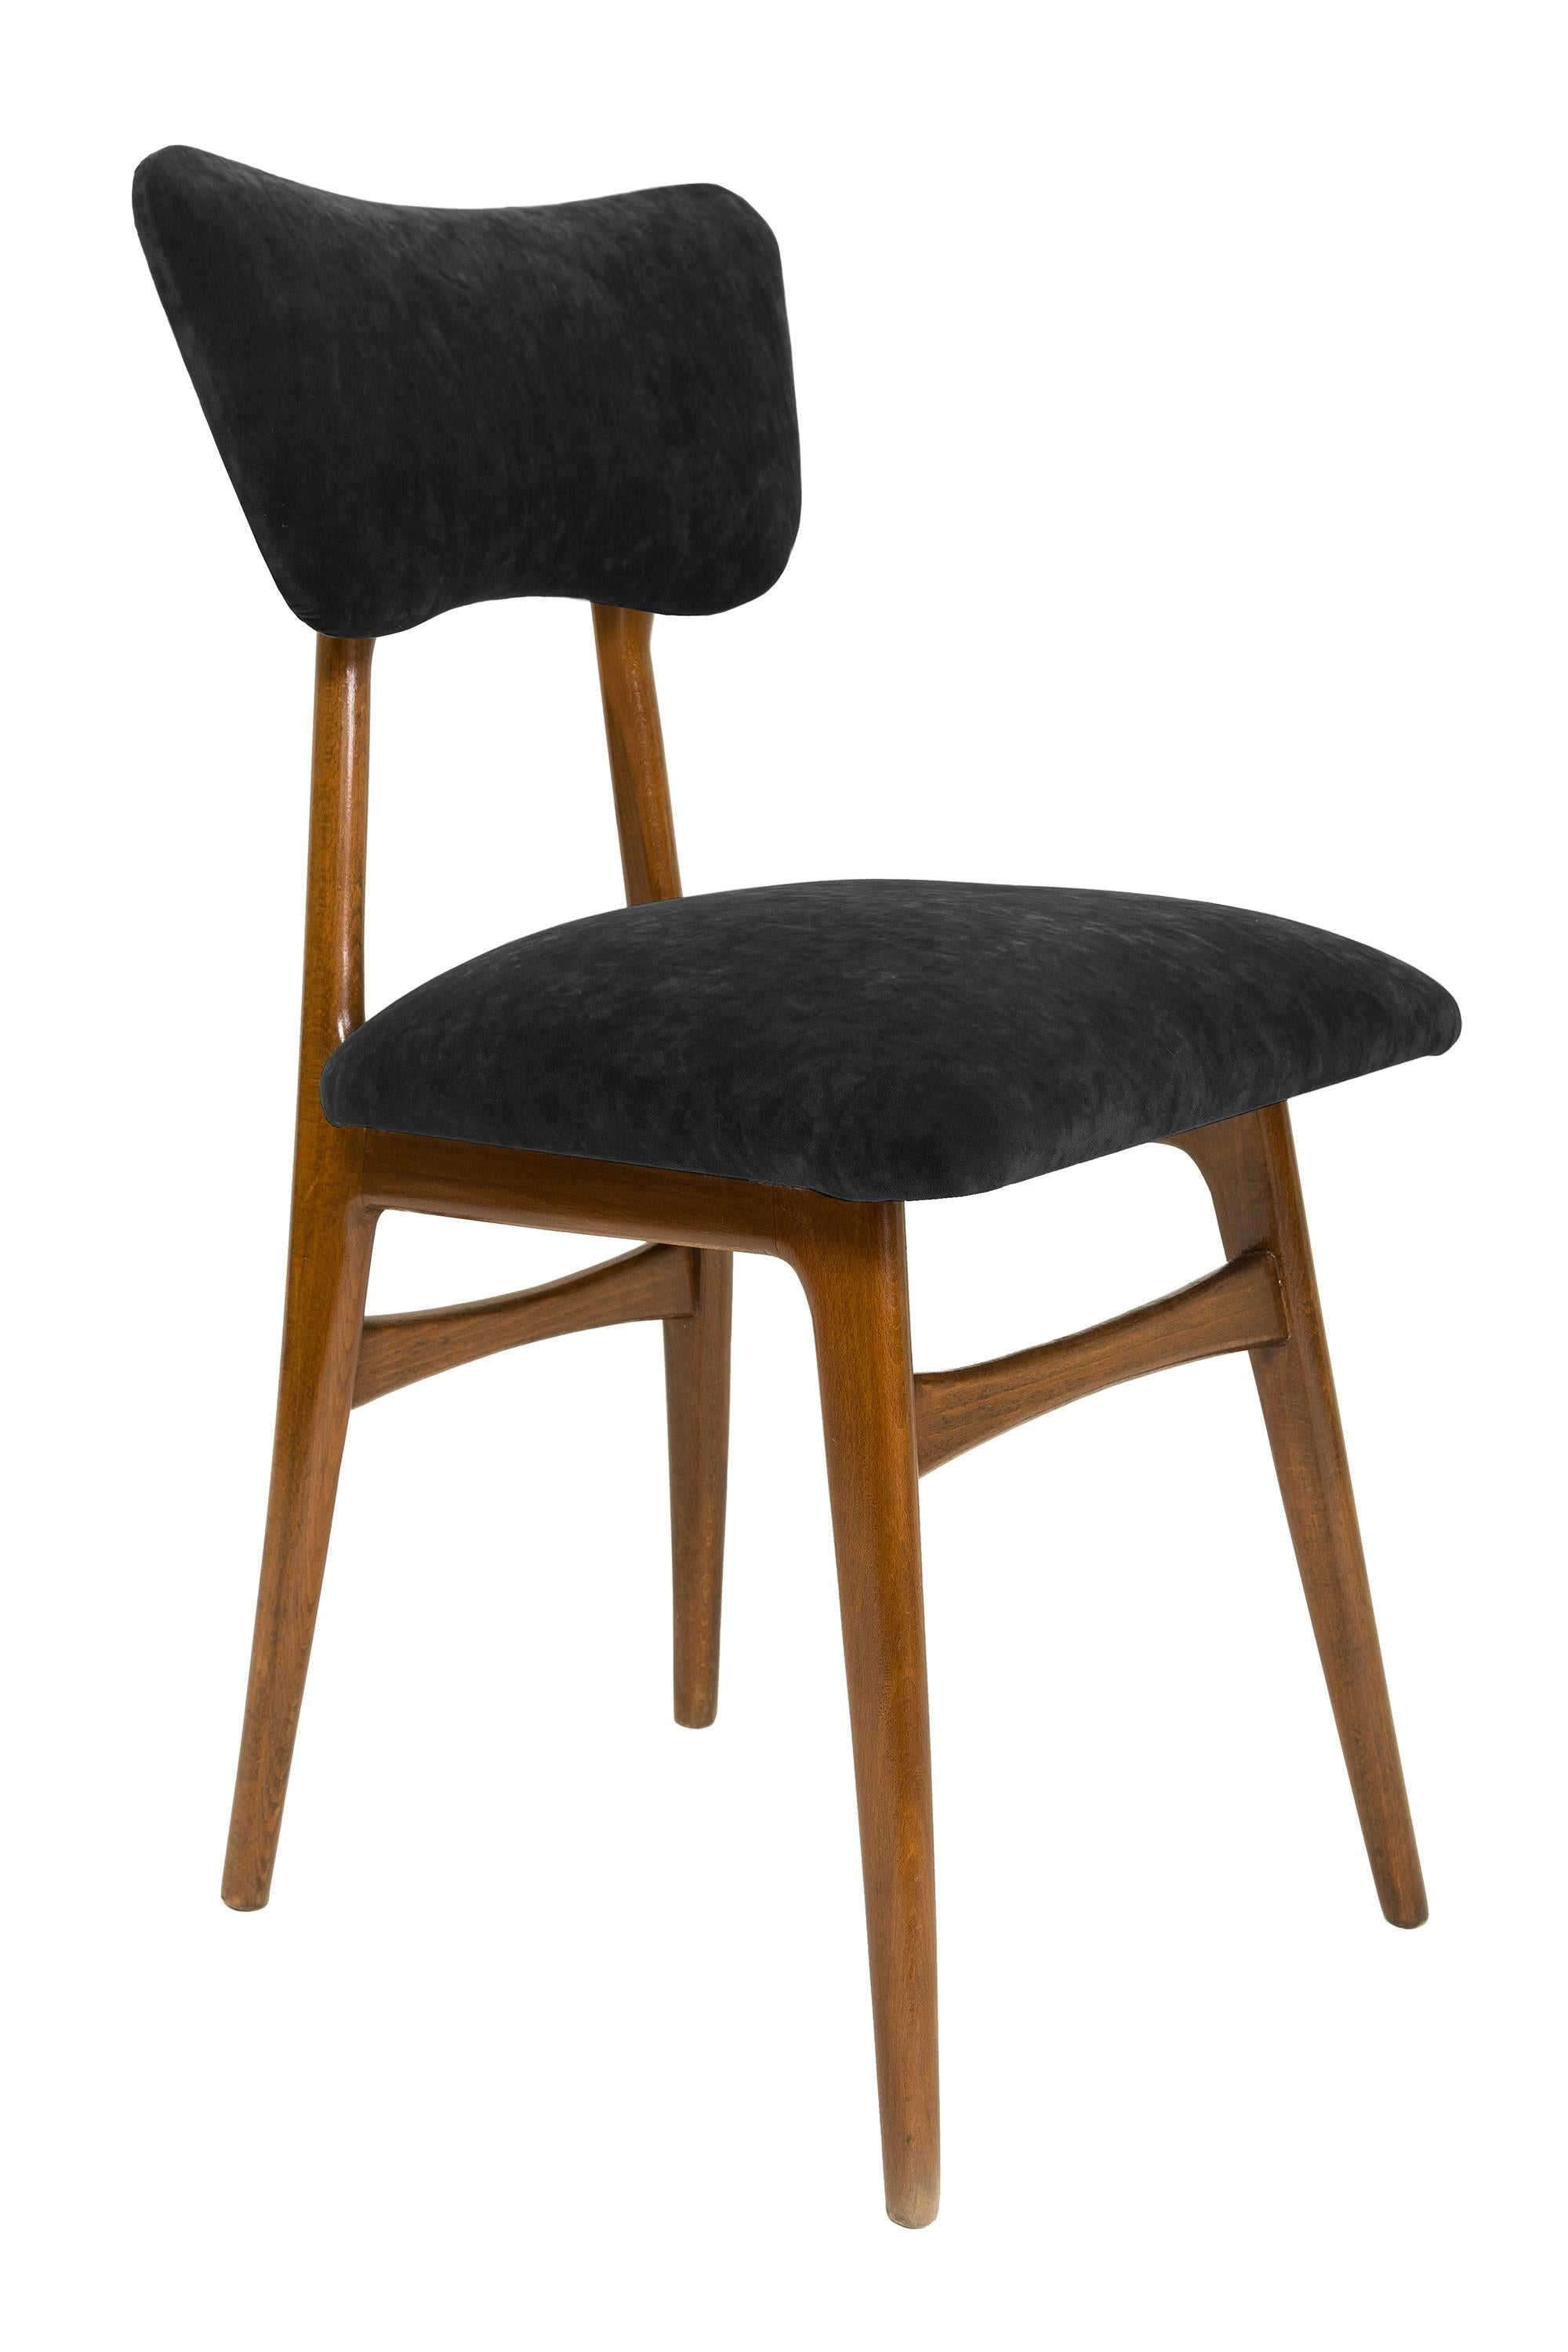 Chairs designed by prof. Rajmund Halas. Made of beechwood. Chair is after a complete upholstery renovation, the woodwork has been refreshed. Seat and back is dressed in a dark green, durable and pleasant to the touch velvet fabric. Chair is stable